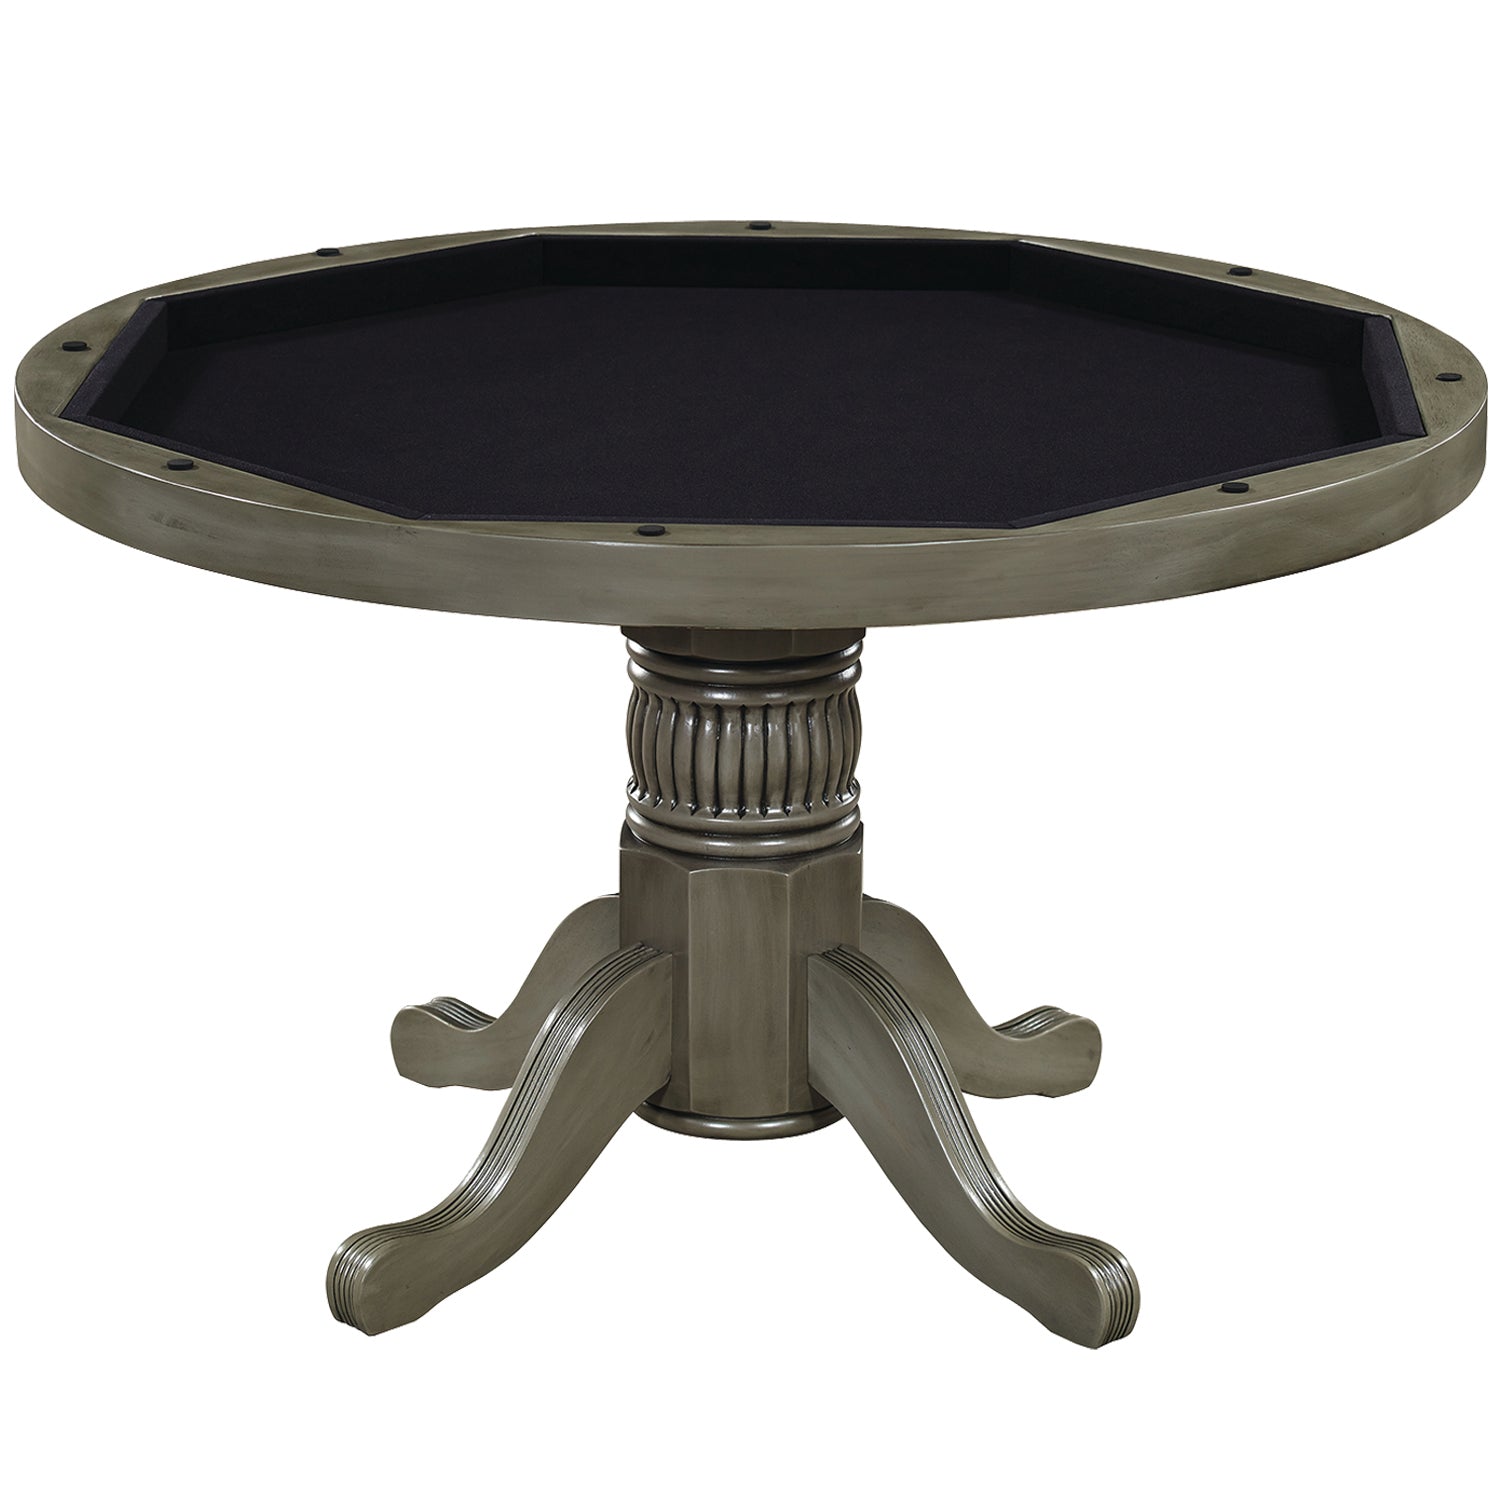 Round convertible game table stoage in a slate finish.